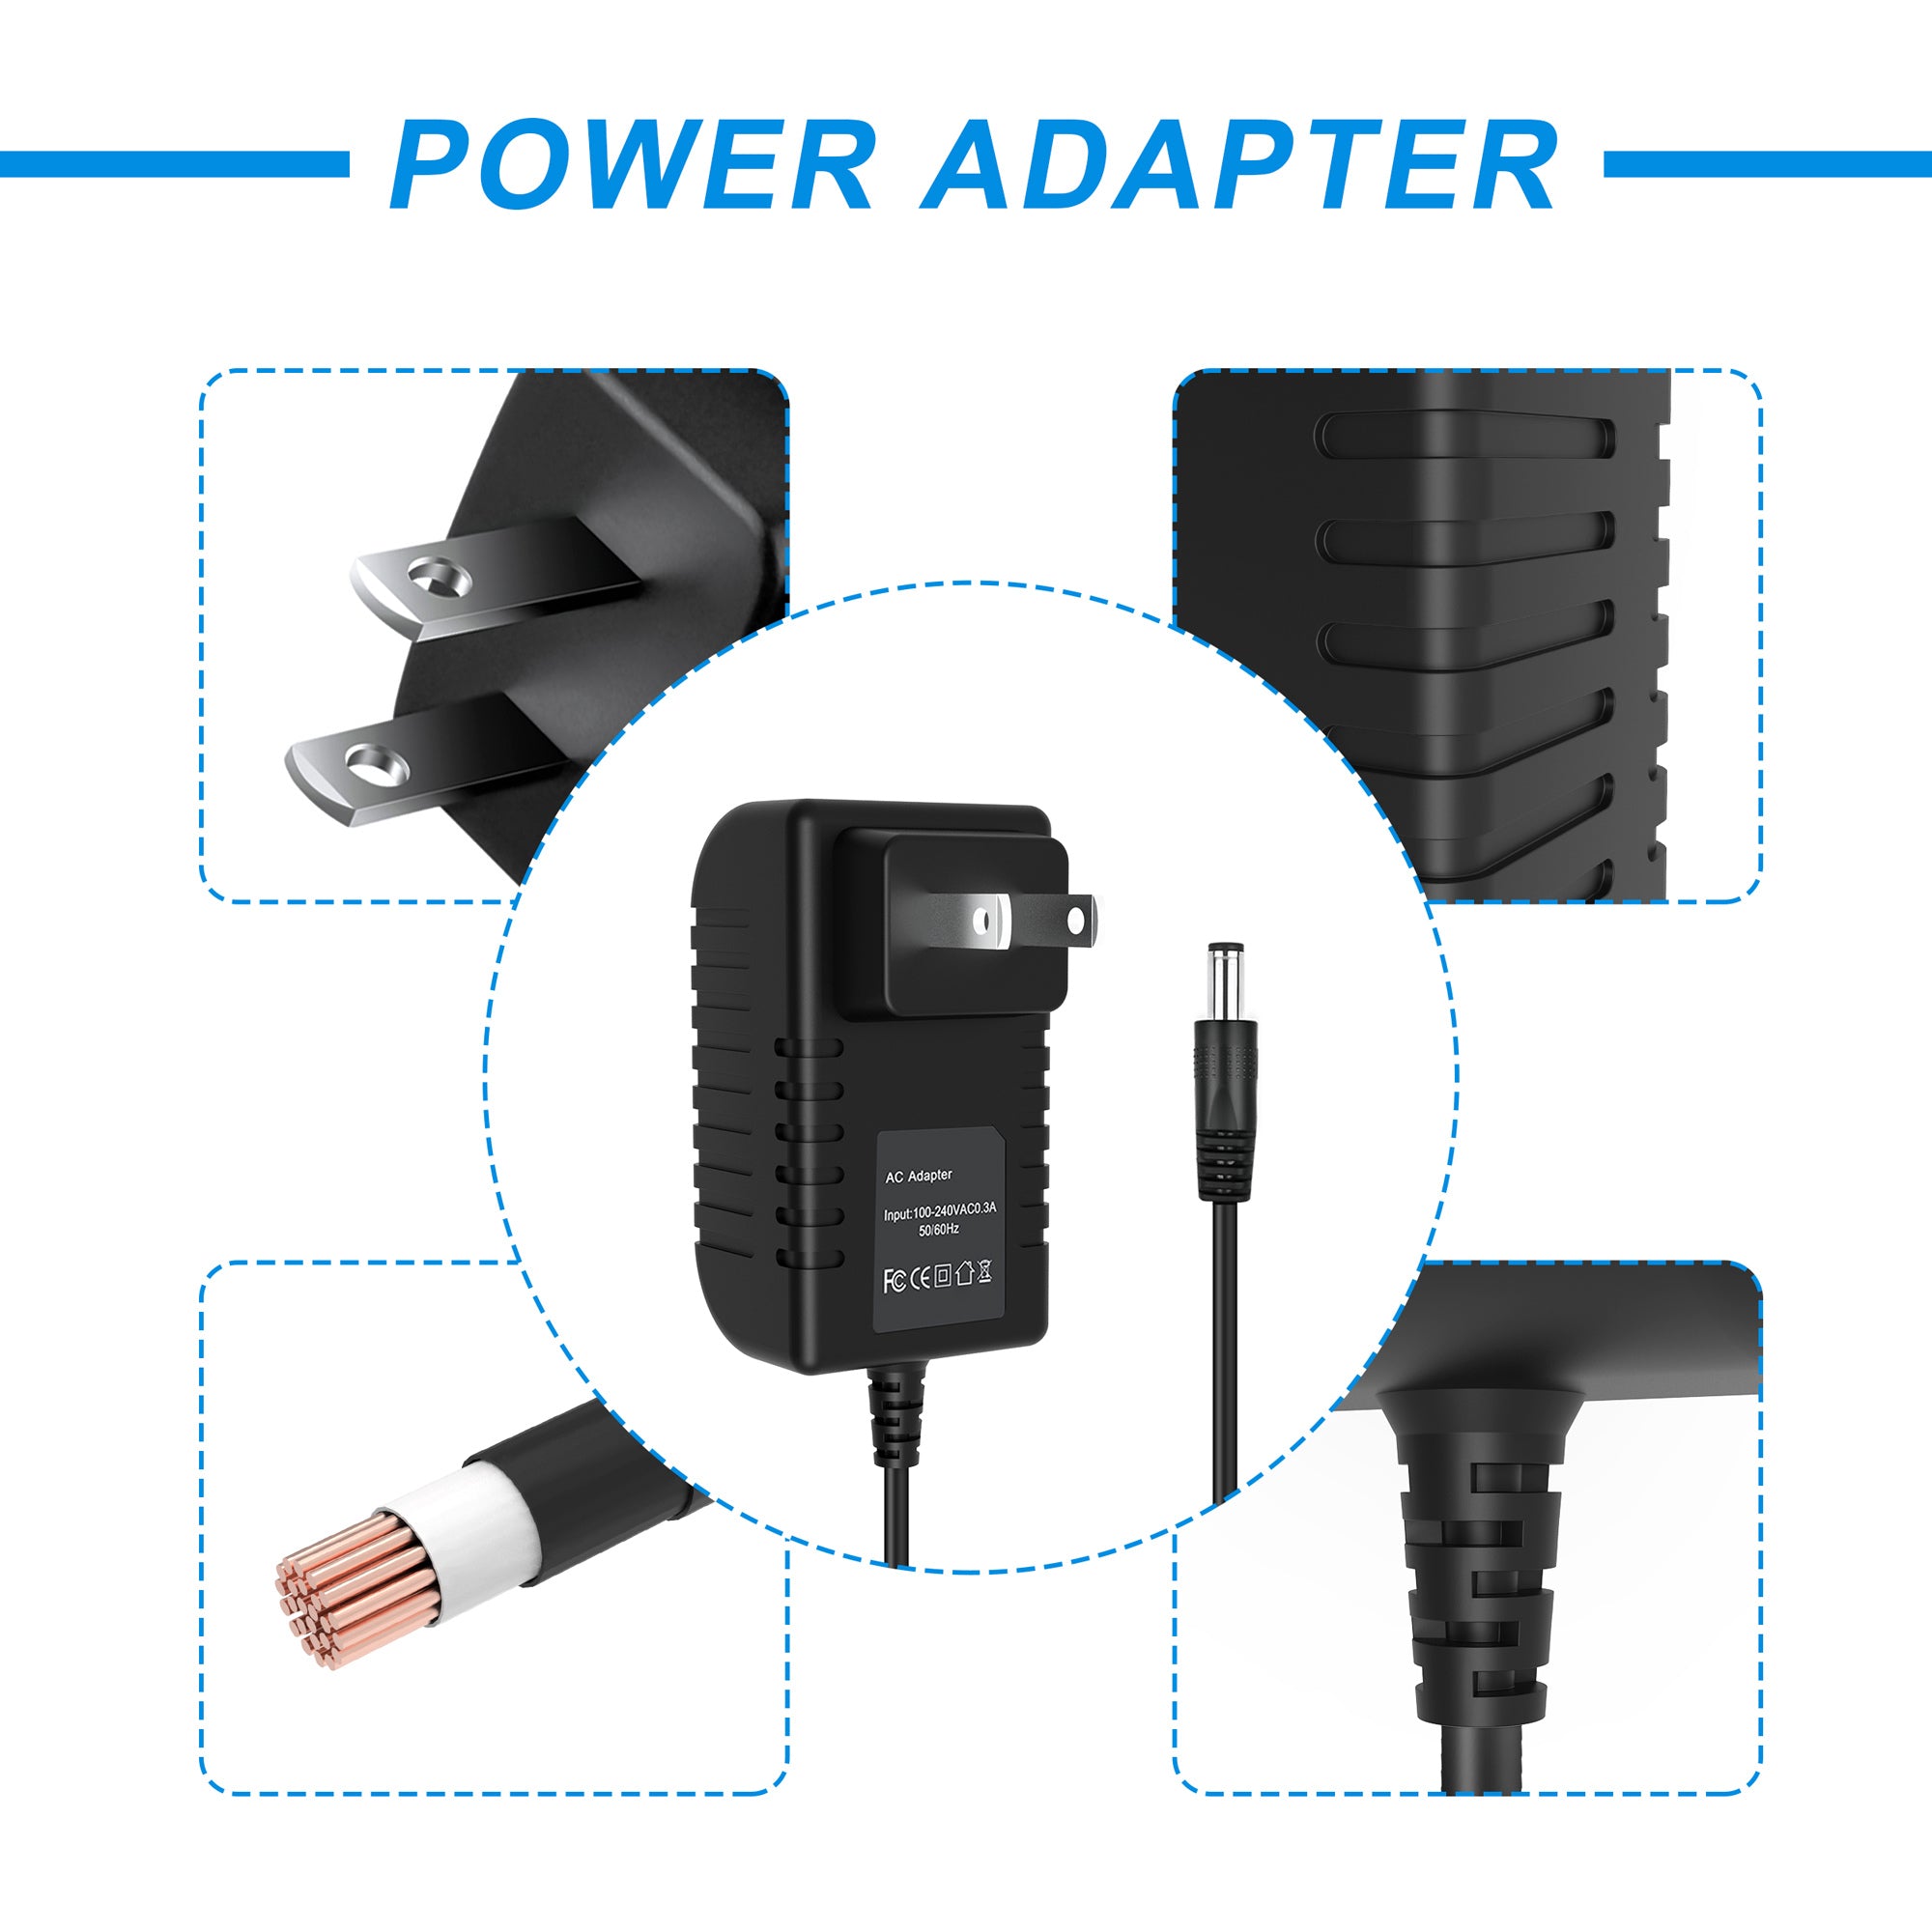 AbleGrid AC/DC Adapter Compatible with Brookstone 801143 HDMI Pocket Projector Power Supply Cord Cable Charger Input: 100V - 120V AC - 240 VAC 50/60Hz Worldwide Voltage Use Mains PSU